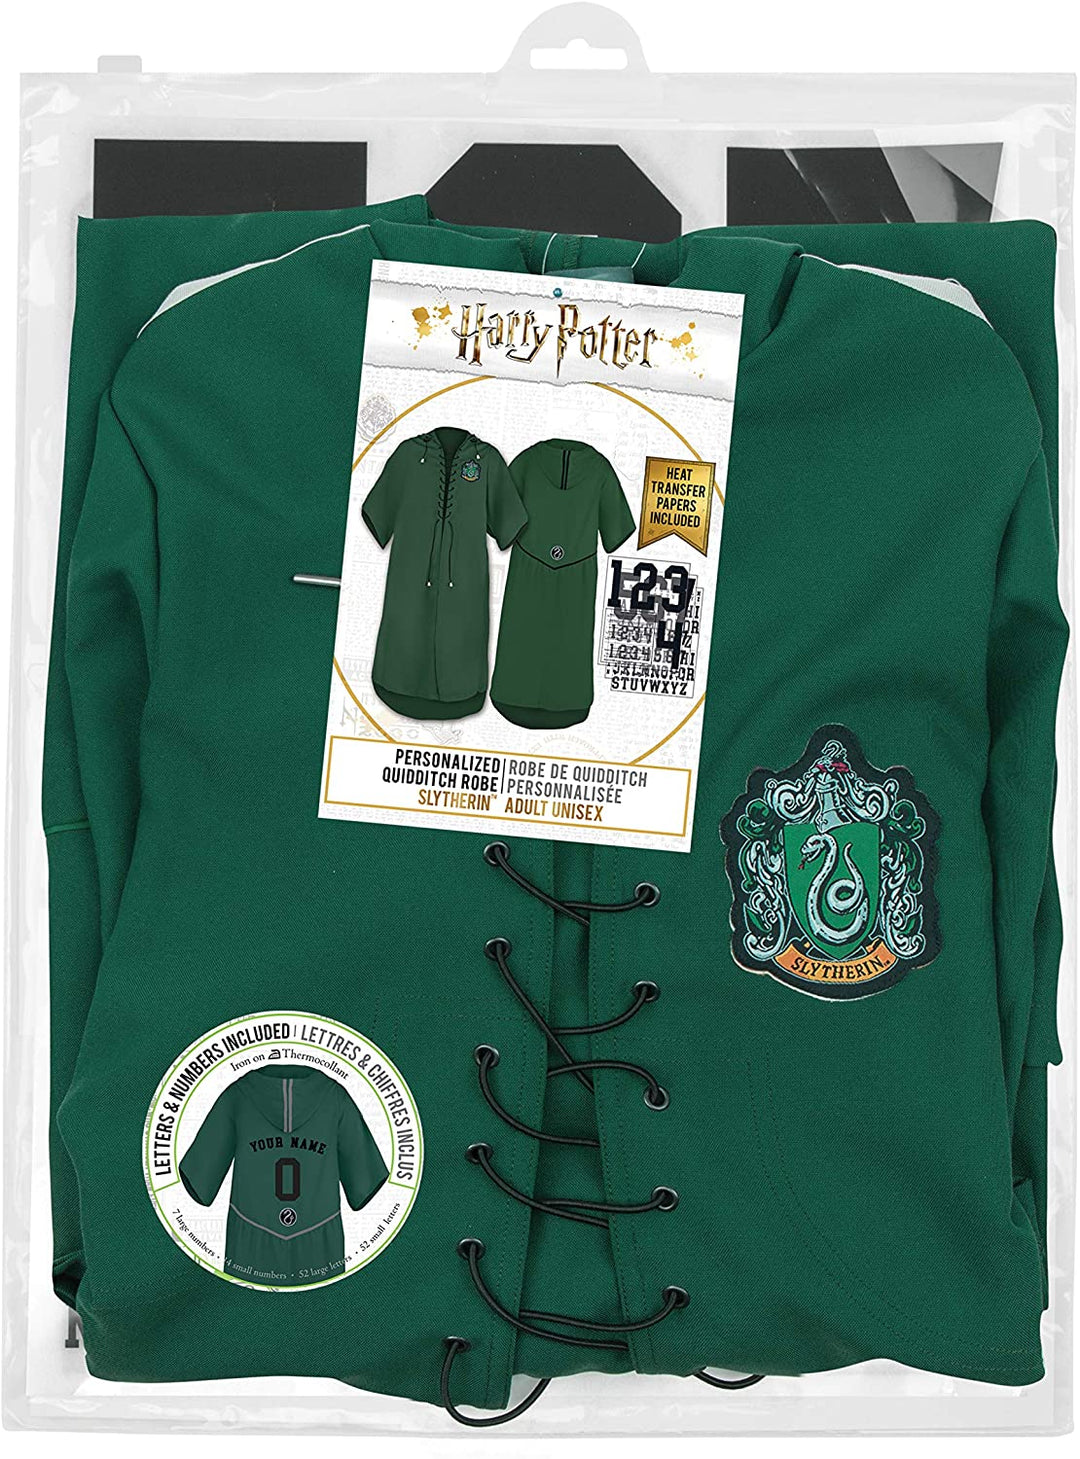 Cinereplicas Harry Potter Quidditch Personalized Robe - Authentic Official Tailored